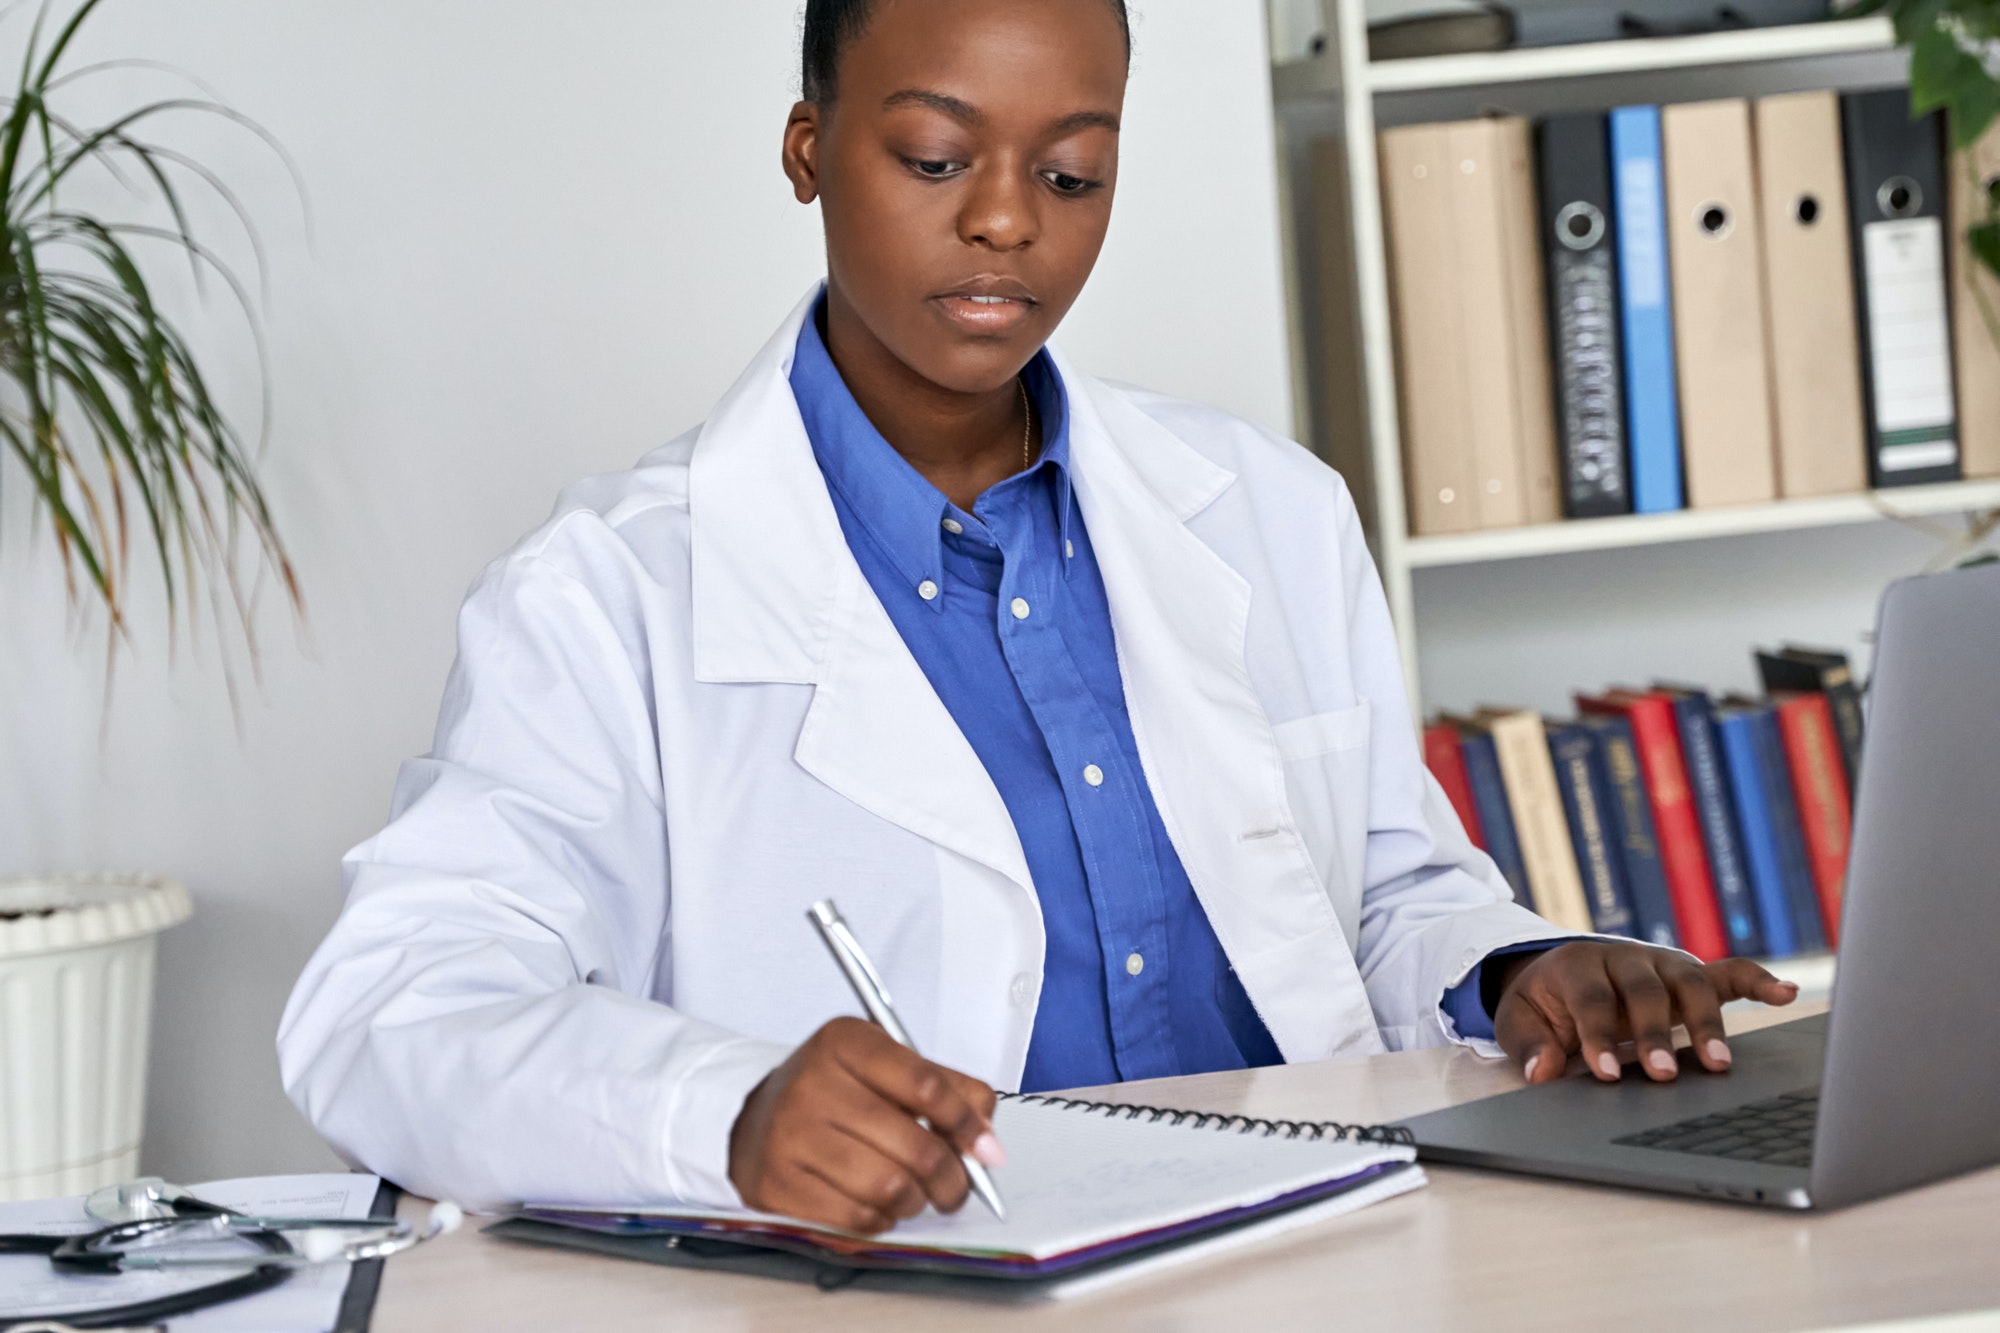 African american doctor writing medical record in notebook using laptop at desk.